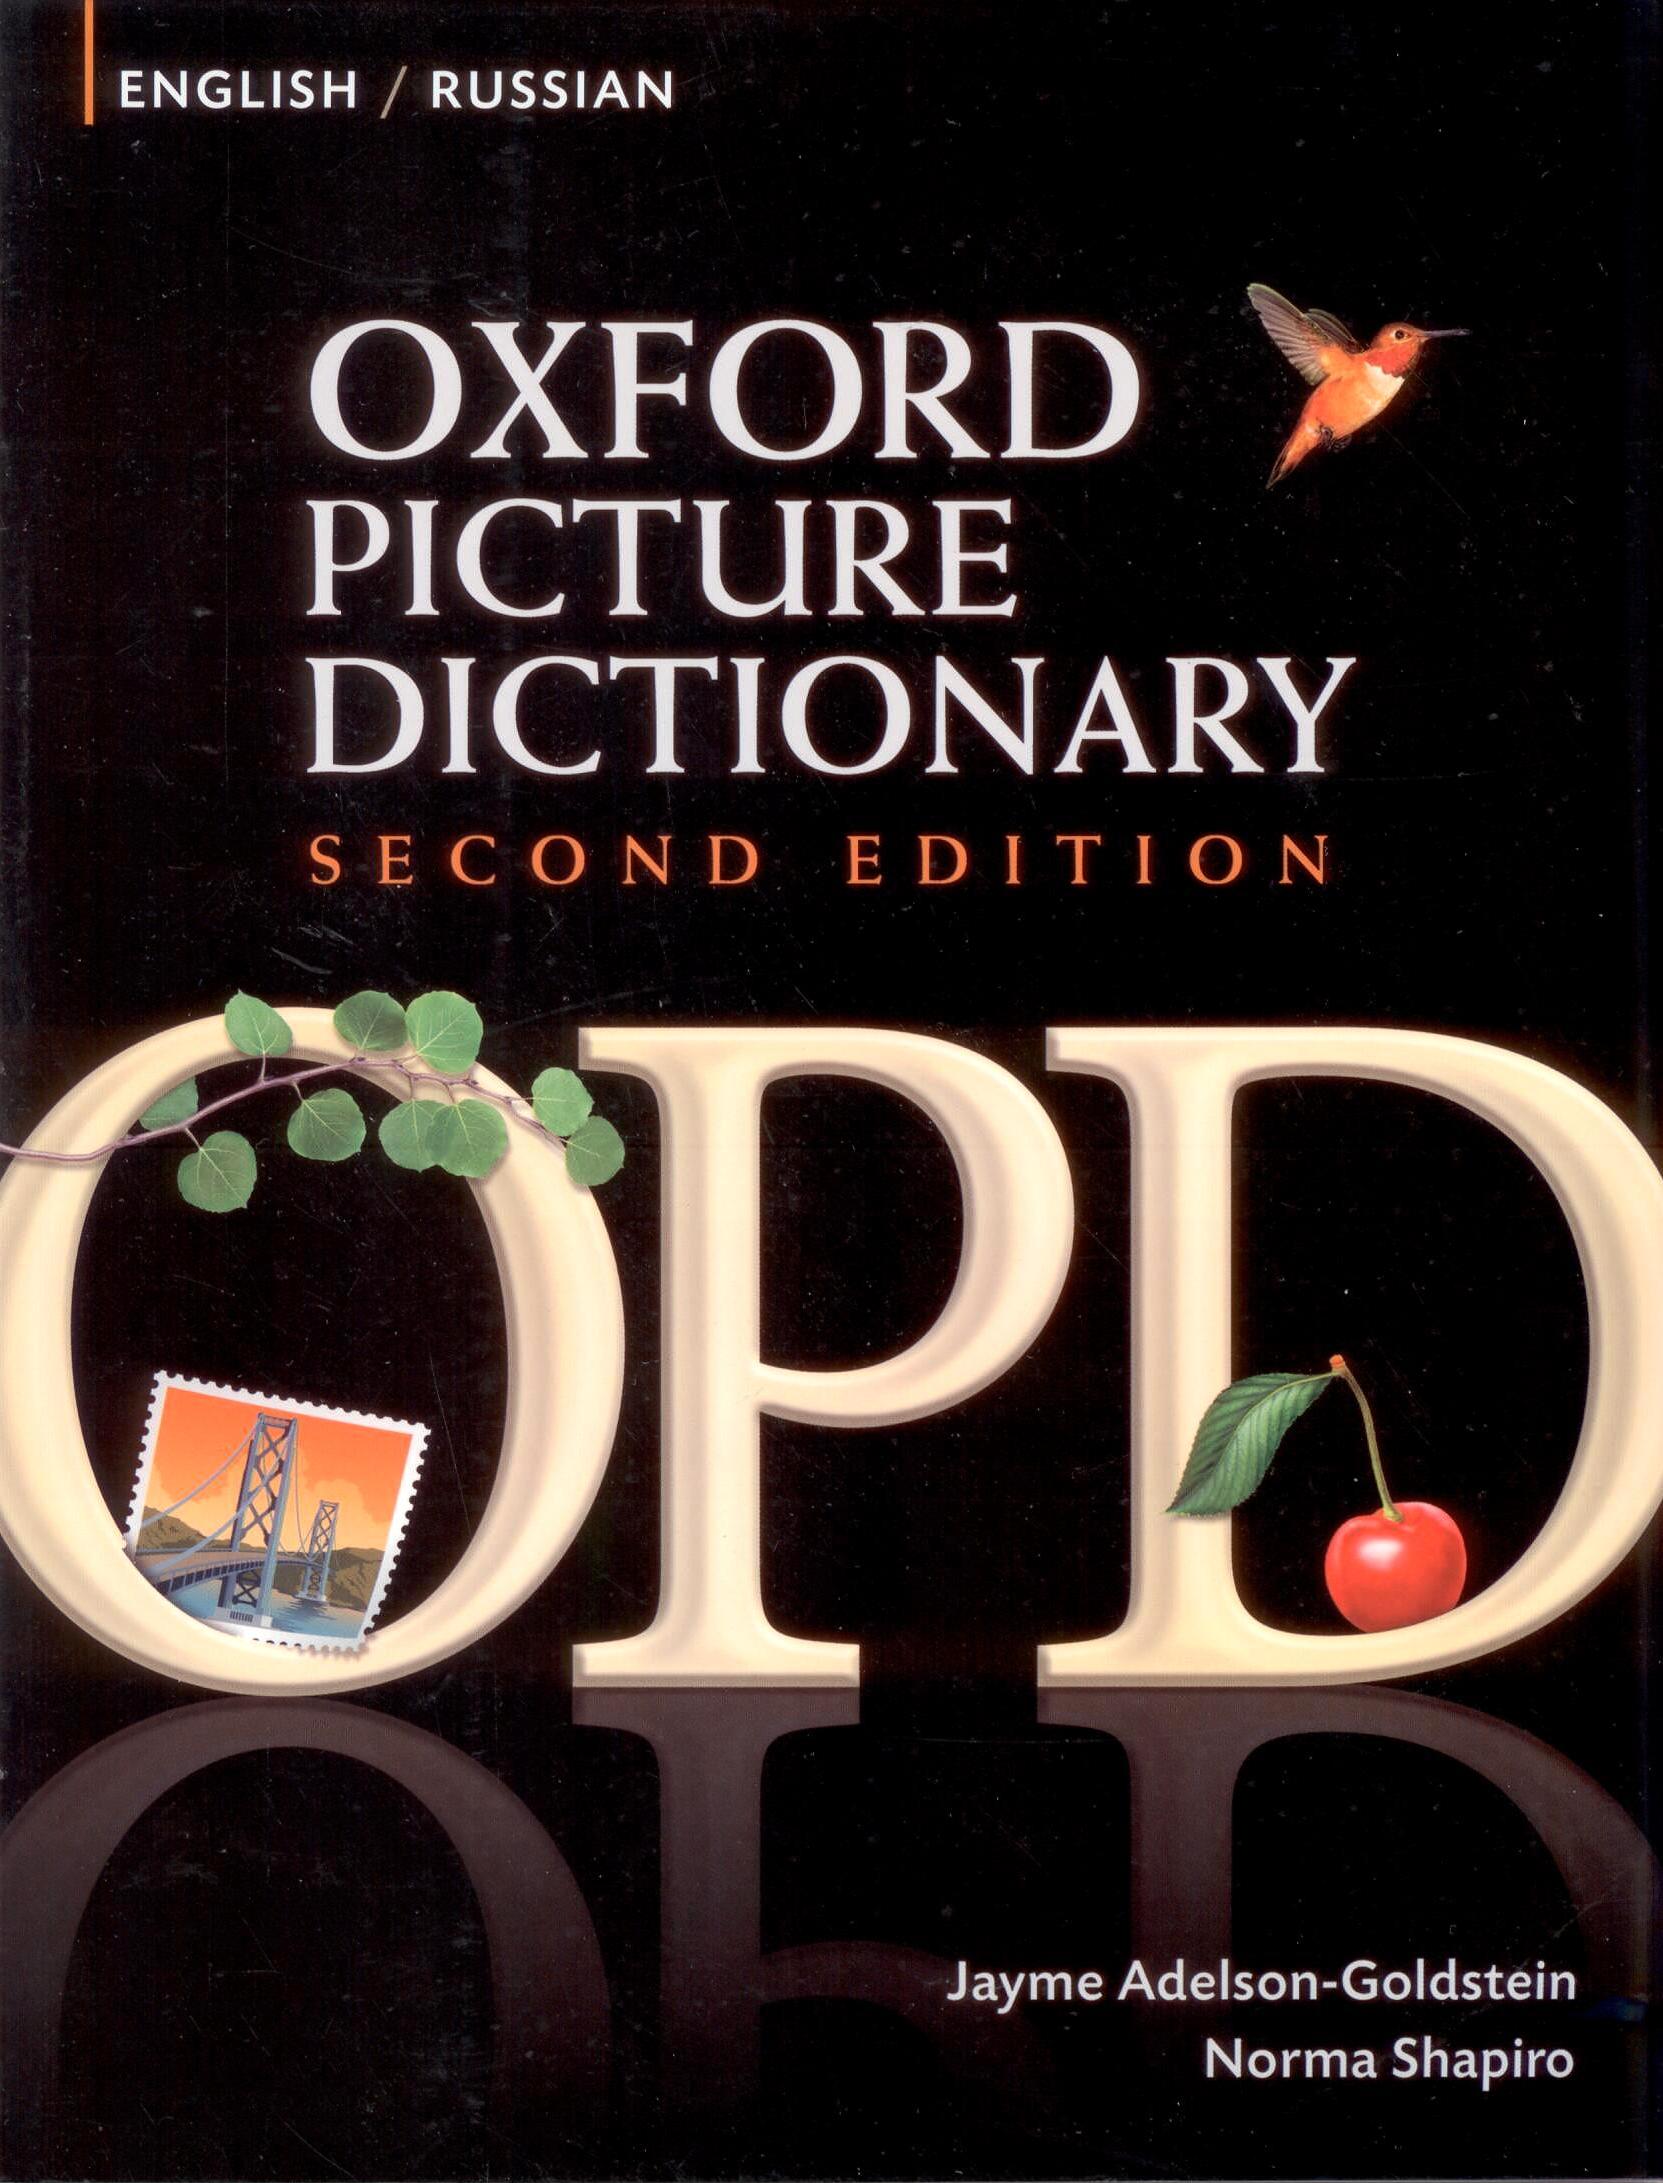 Oxford Picture Dictionary (Second Edition) English-Russian